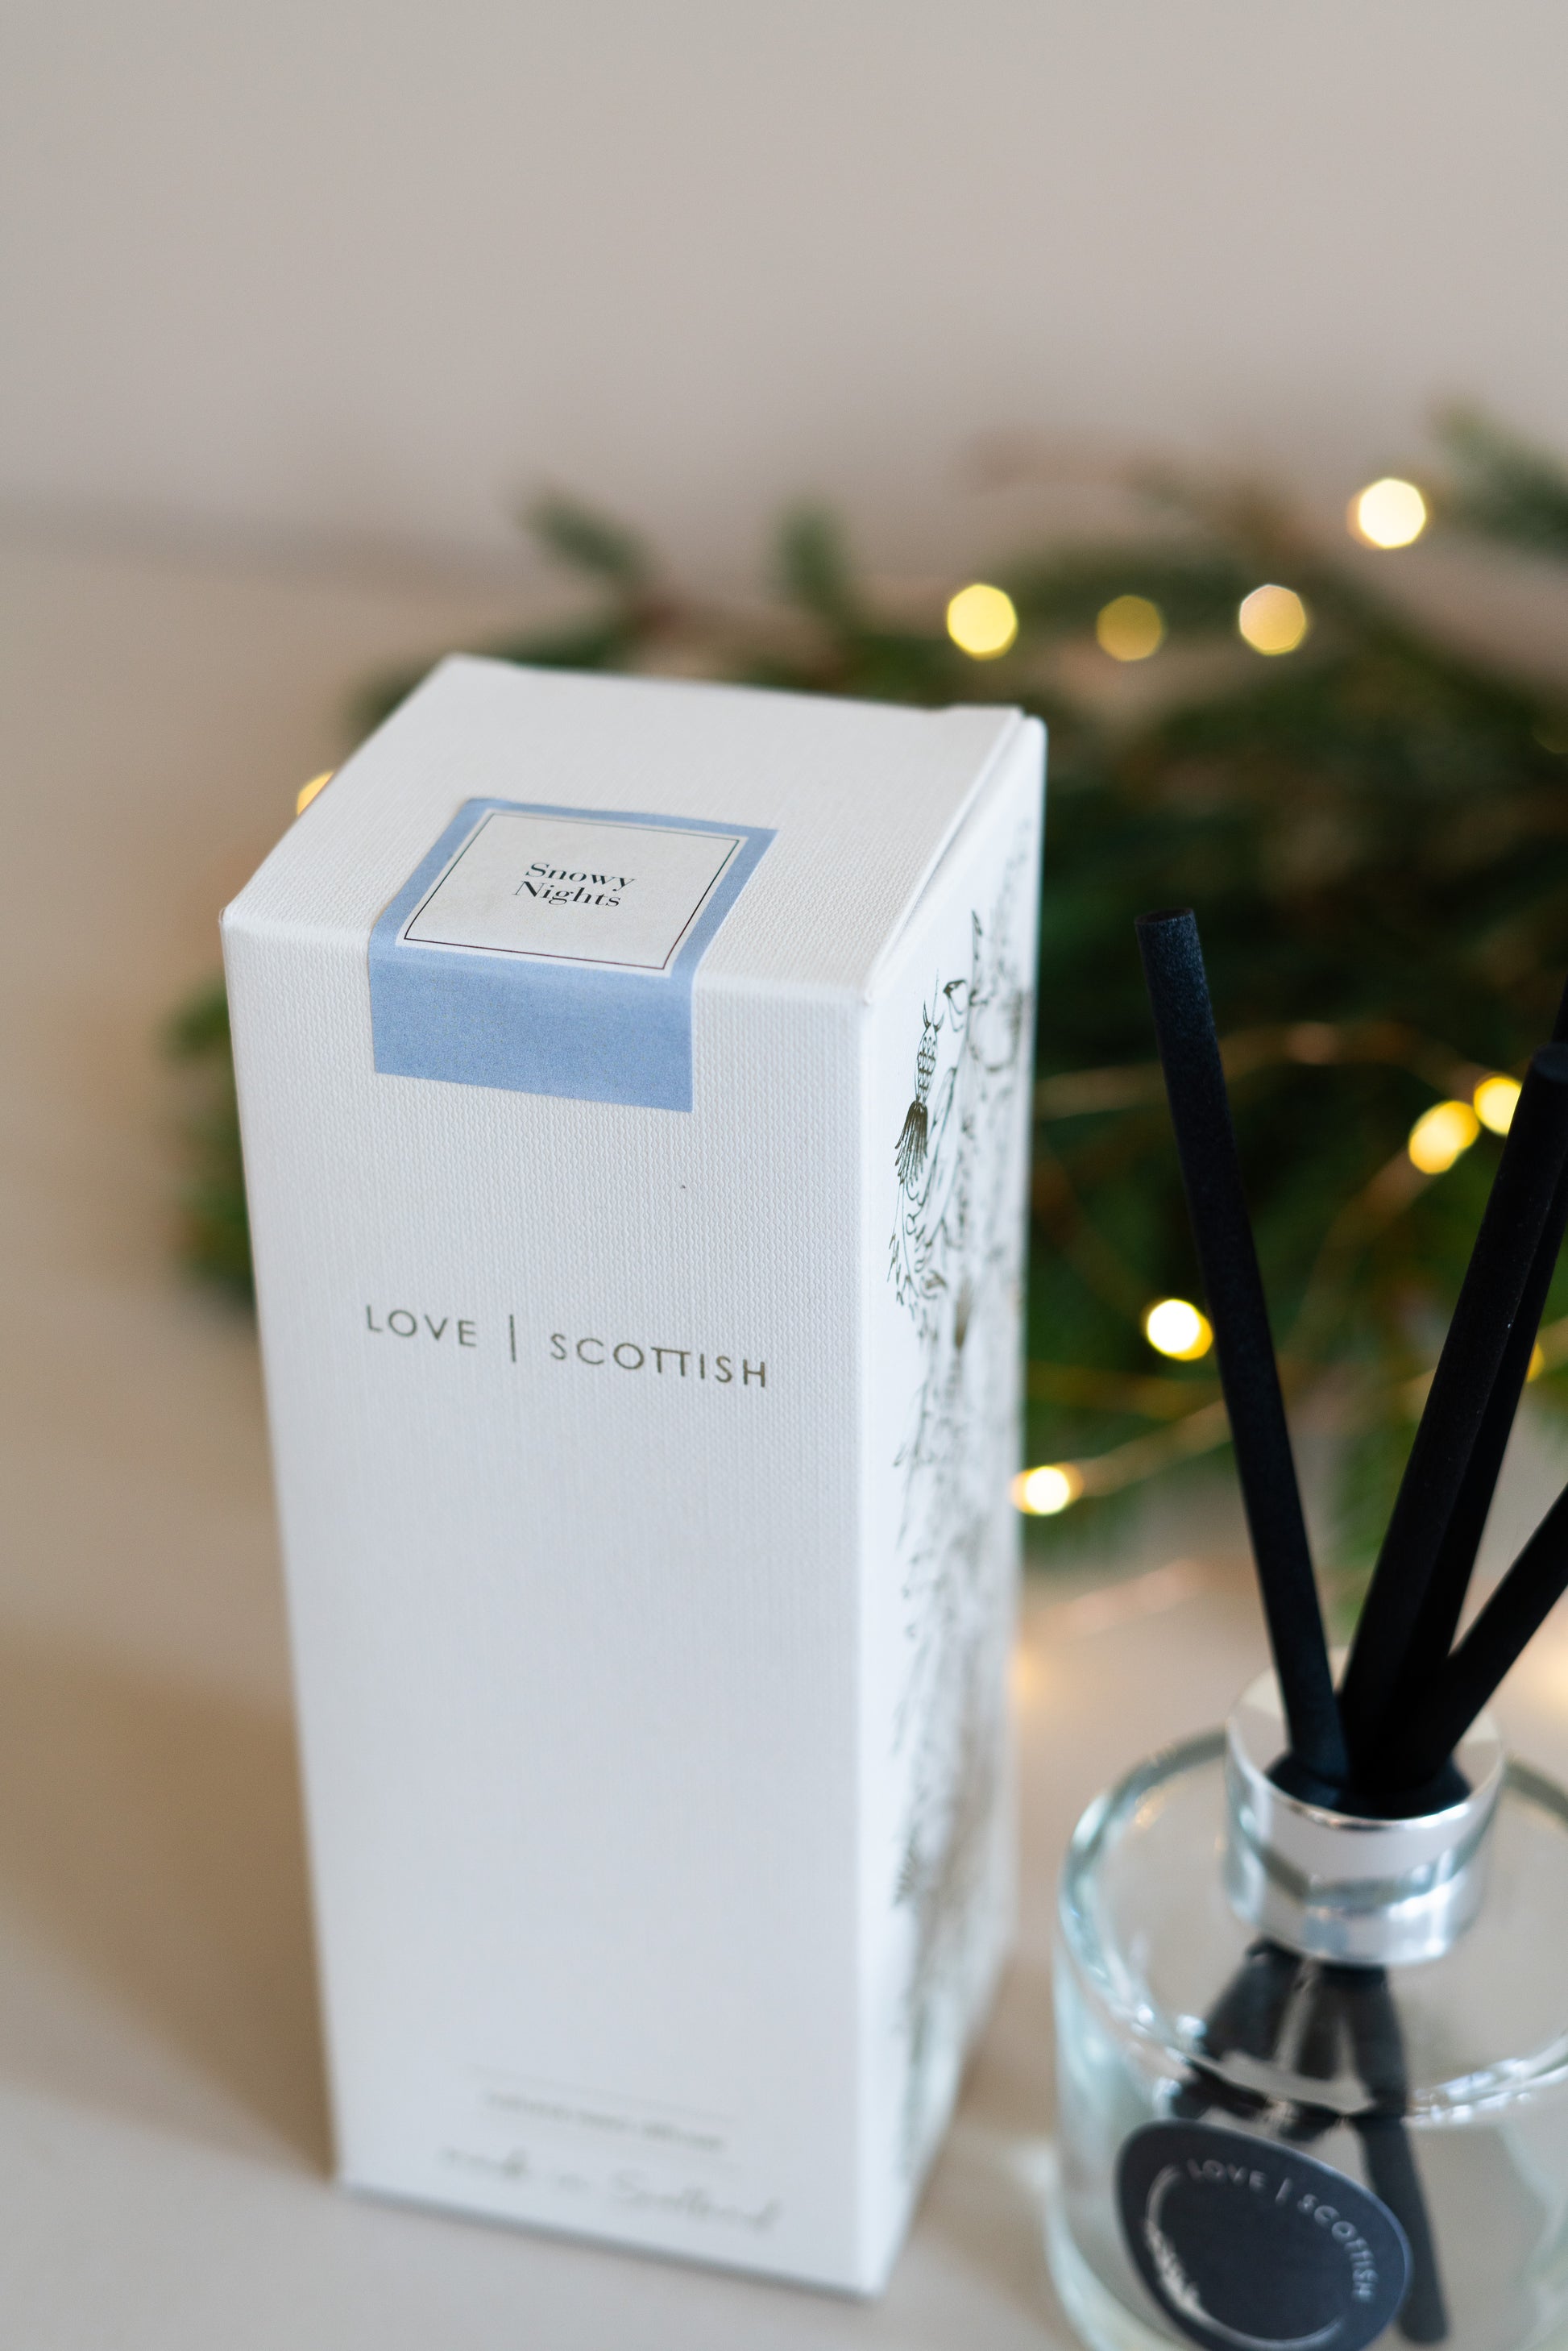 Love Scottish Snowy Nights Diffusers. Made in Scotland.